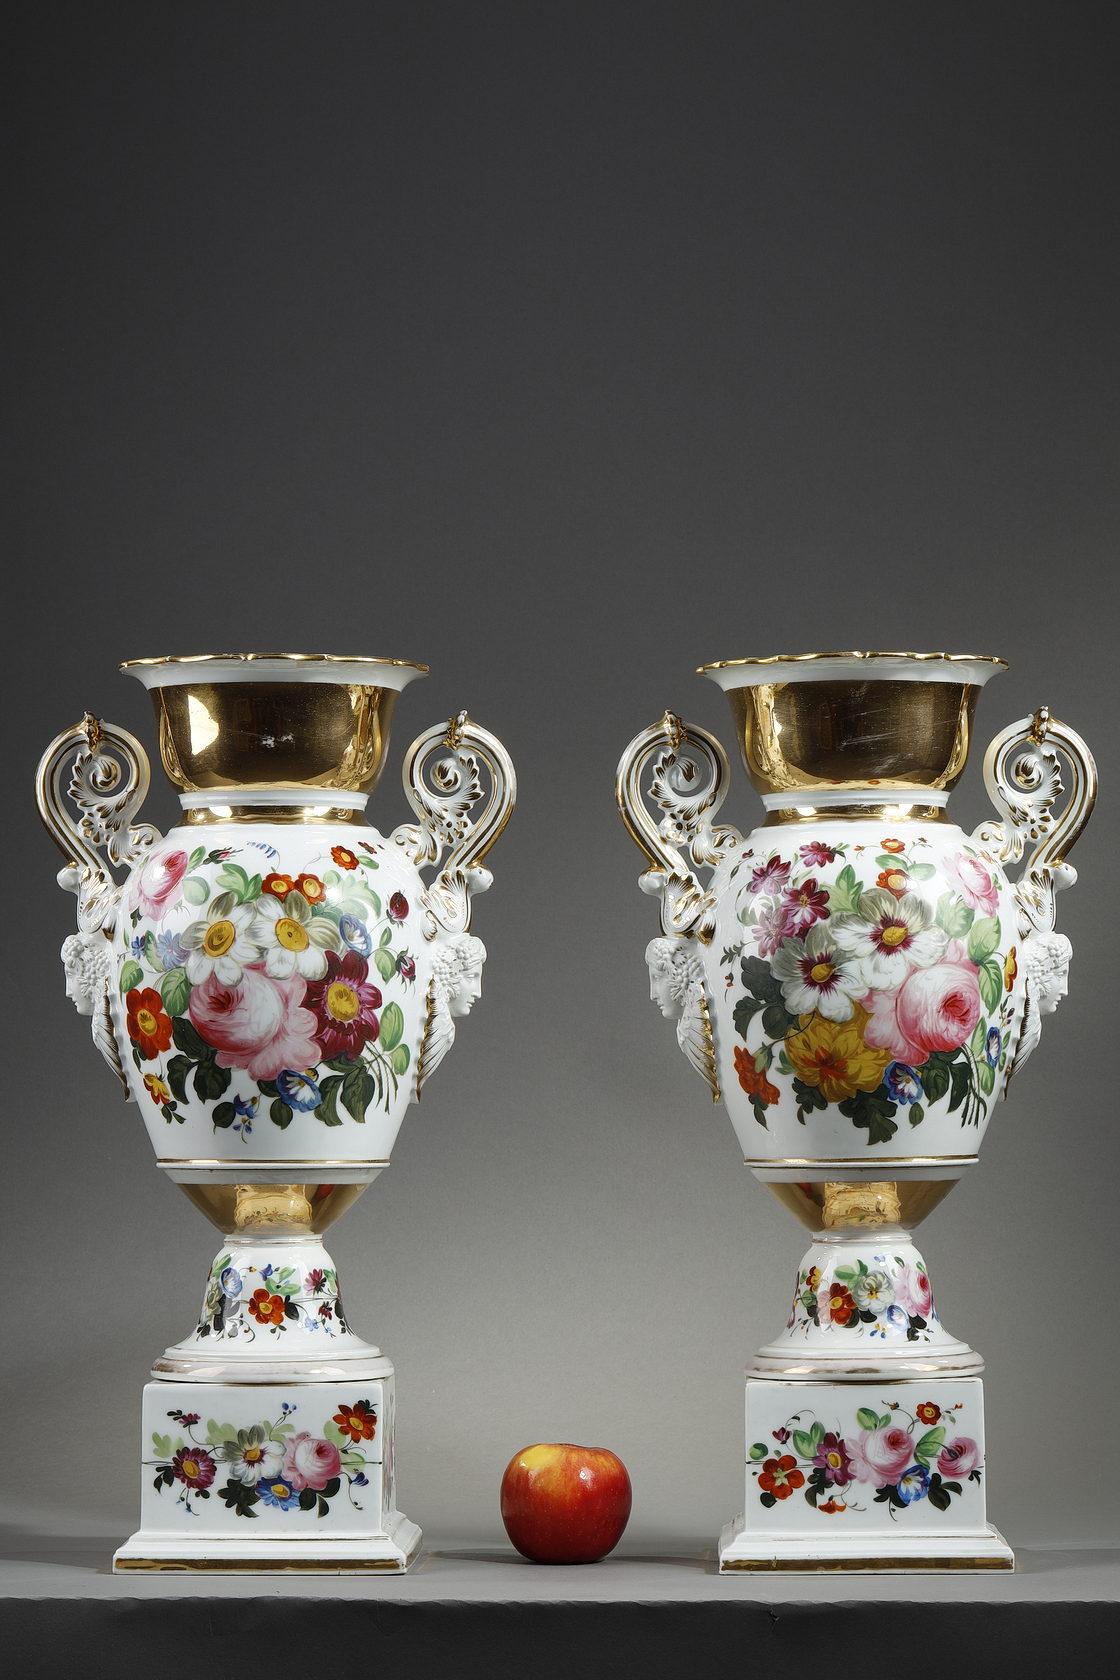 A pair of Paris porcelain baluster vases with polychrome and gold decoration. They have two side handles in volutes decorated with acanthus leaves and ending with feminine faces crowned with grapes and oak leaves. The scalloped edges are underlined